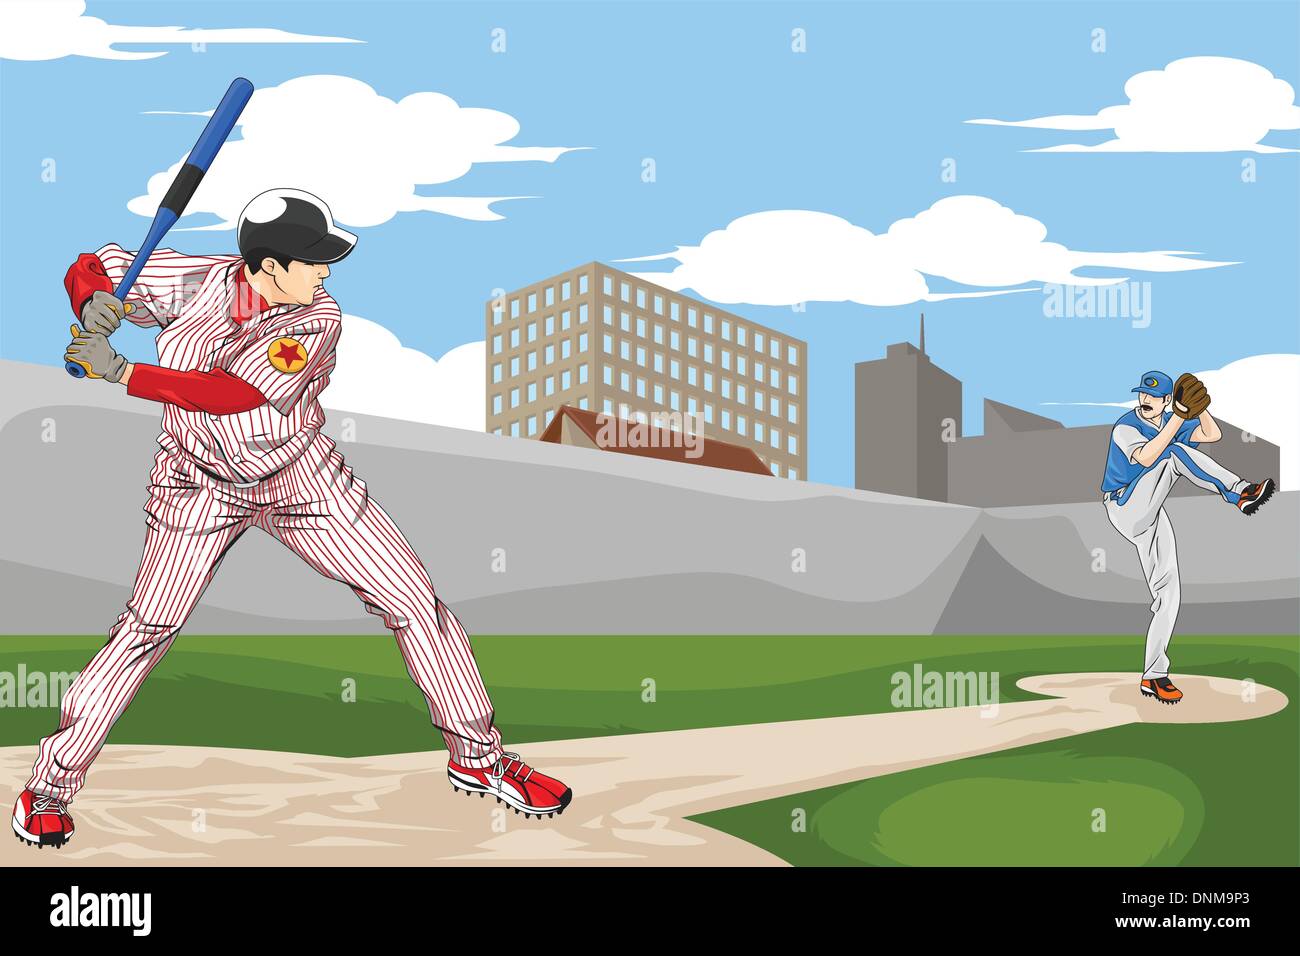 A vector illustration of a people playing baseball Stock Vector